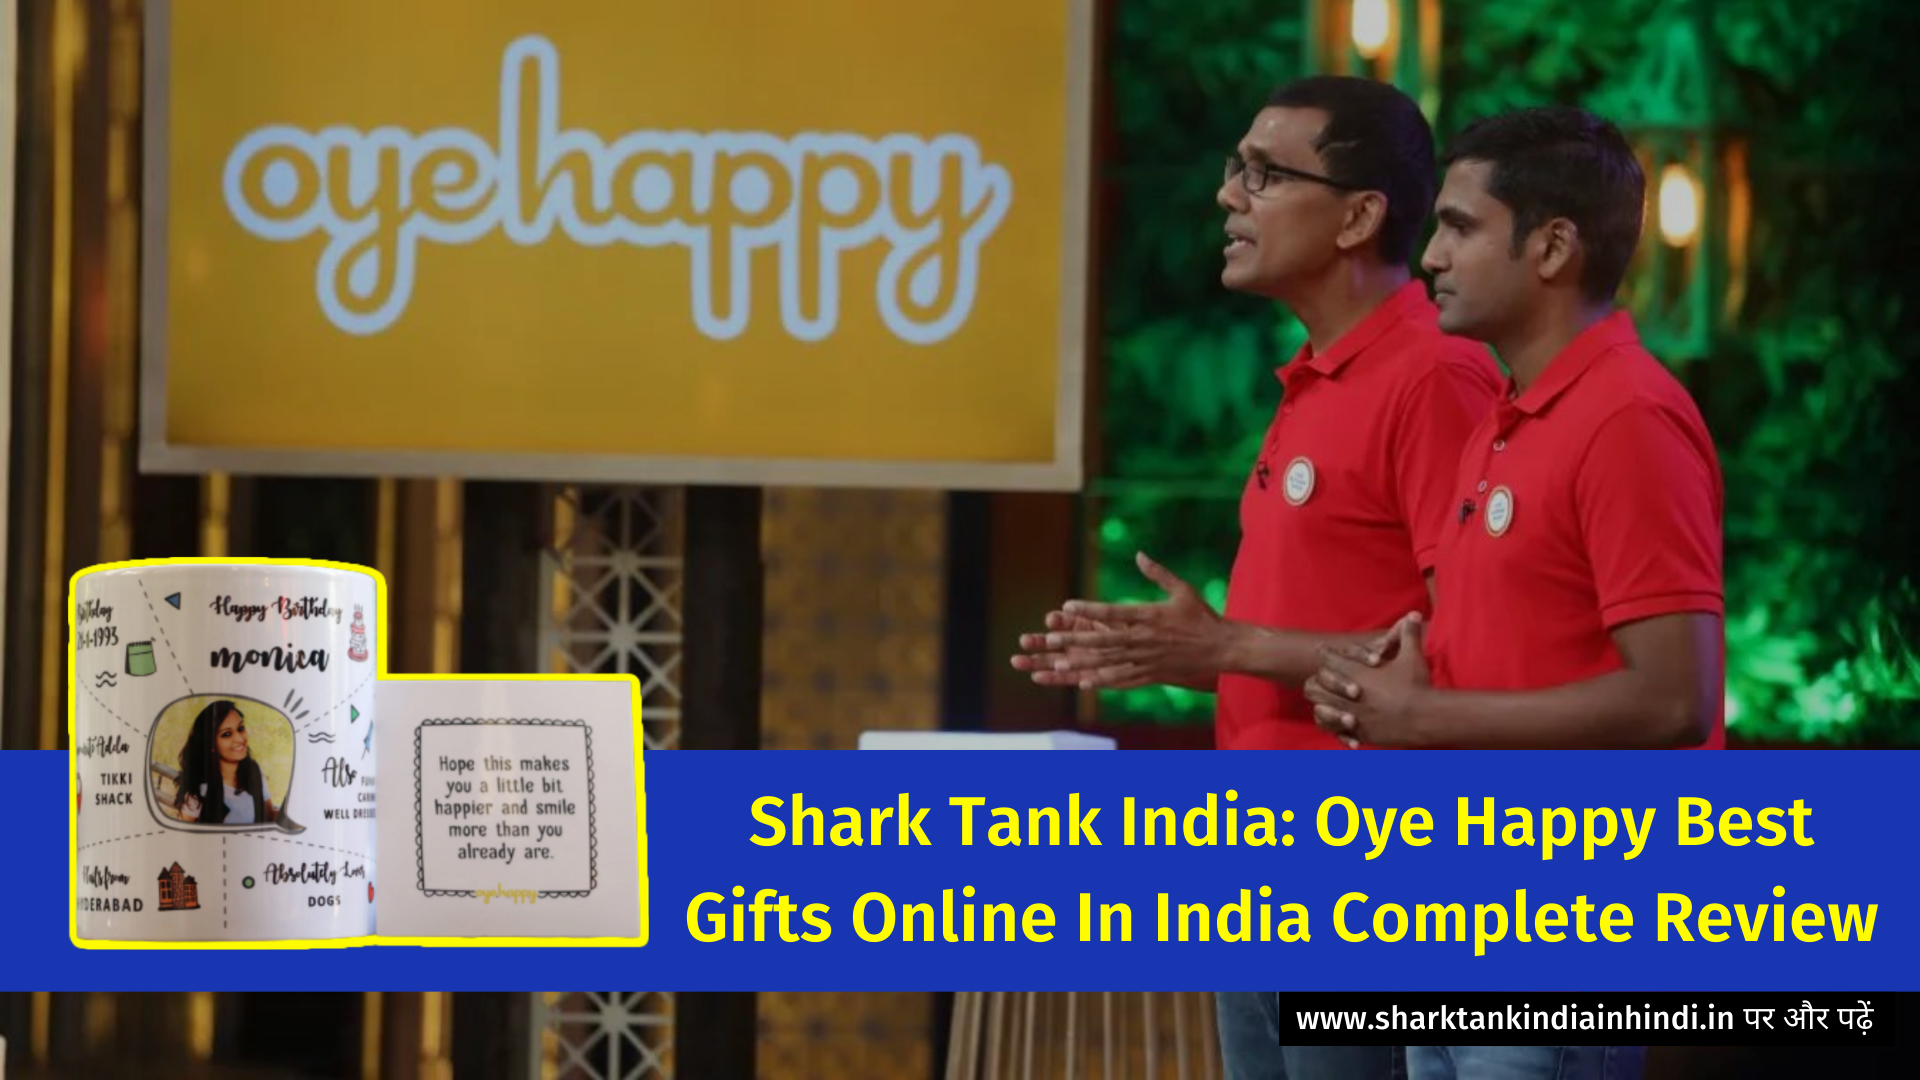 Shark Tank India: Oye Happy Best Gifts Online In India Complete Review